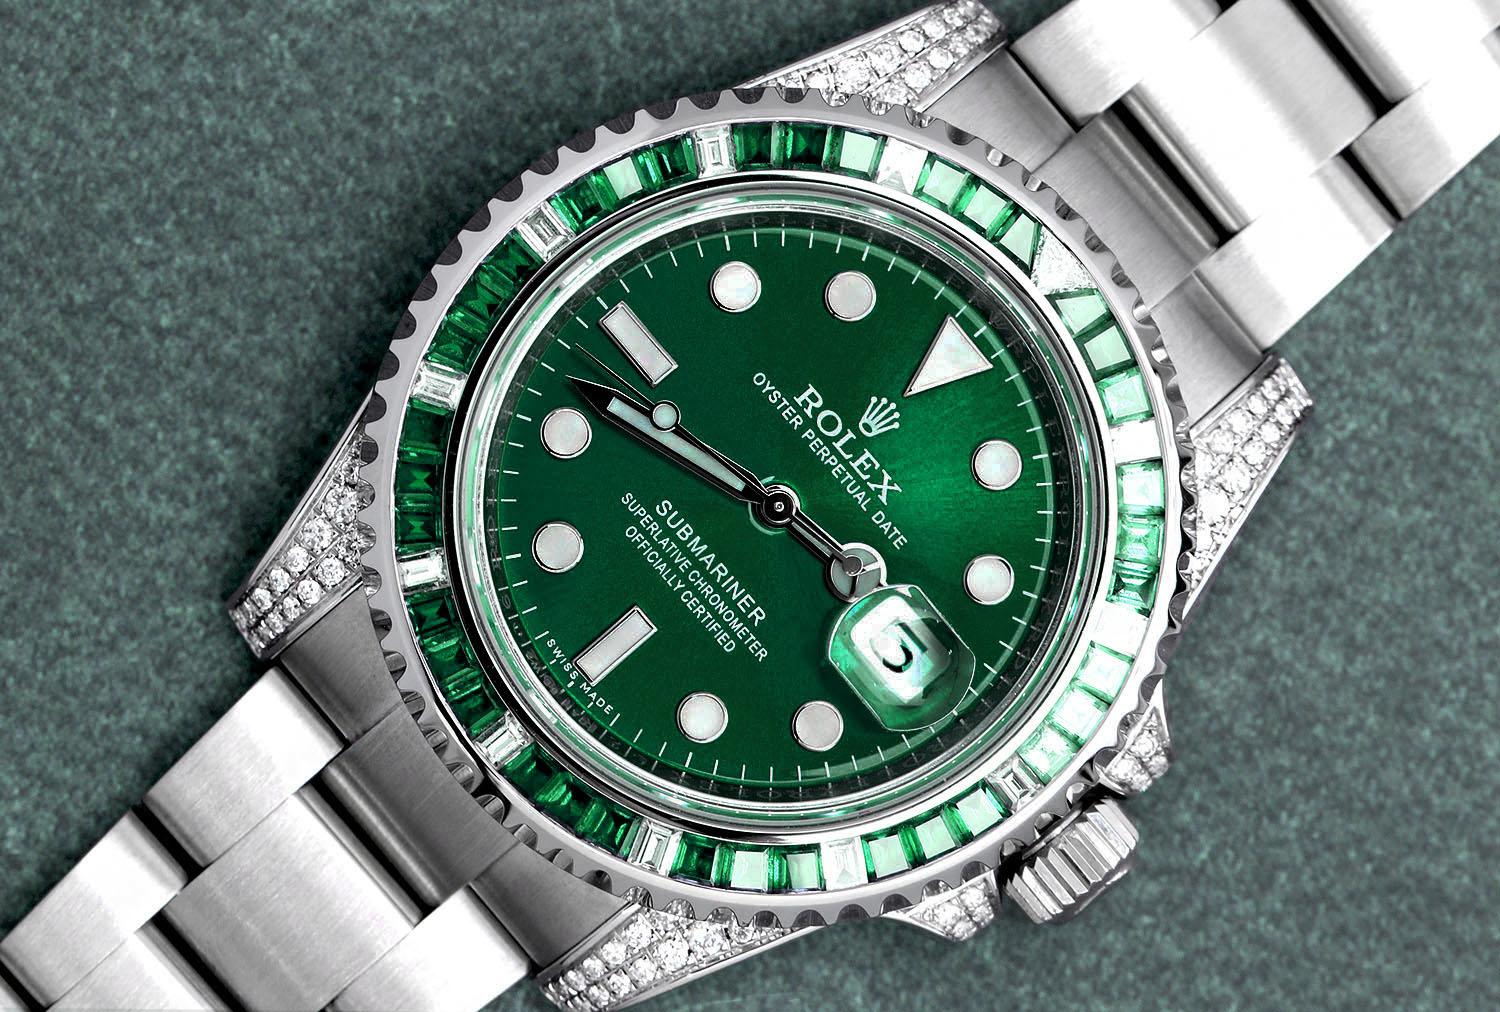 Rolex Submariner Date Custom Diamond Stainless Steel Watch with Emeralds/Diamond Bezel Lugs and Green Dial 116610. Watch has been professionally polished and has never been worn after customization. There are absolutely NO visible scratches or